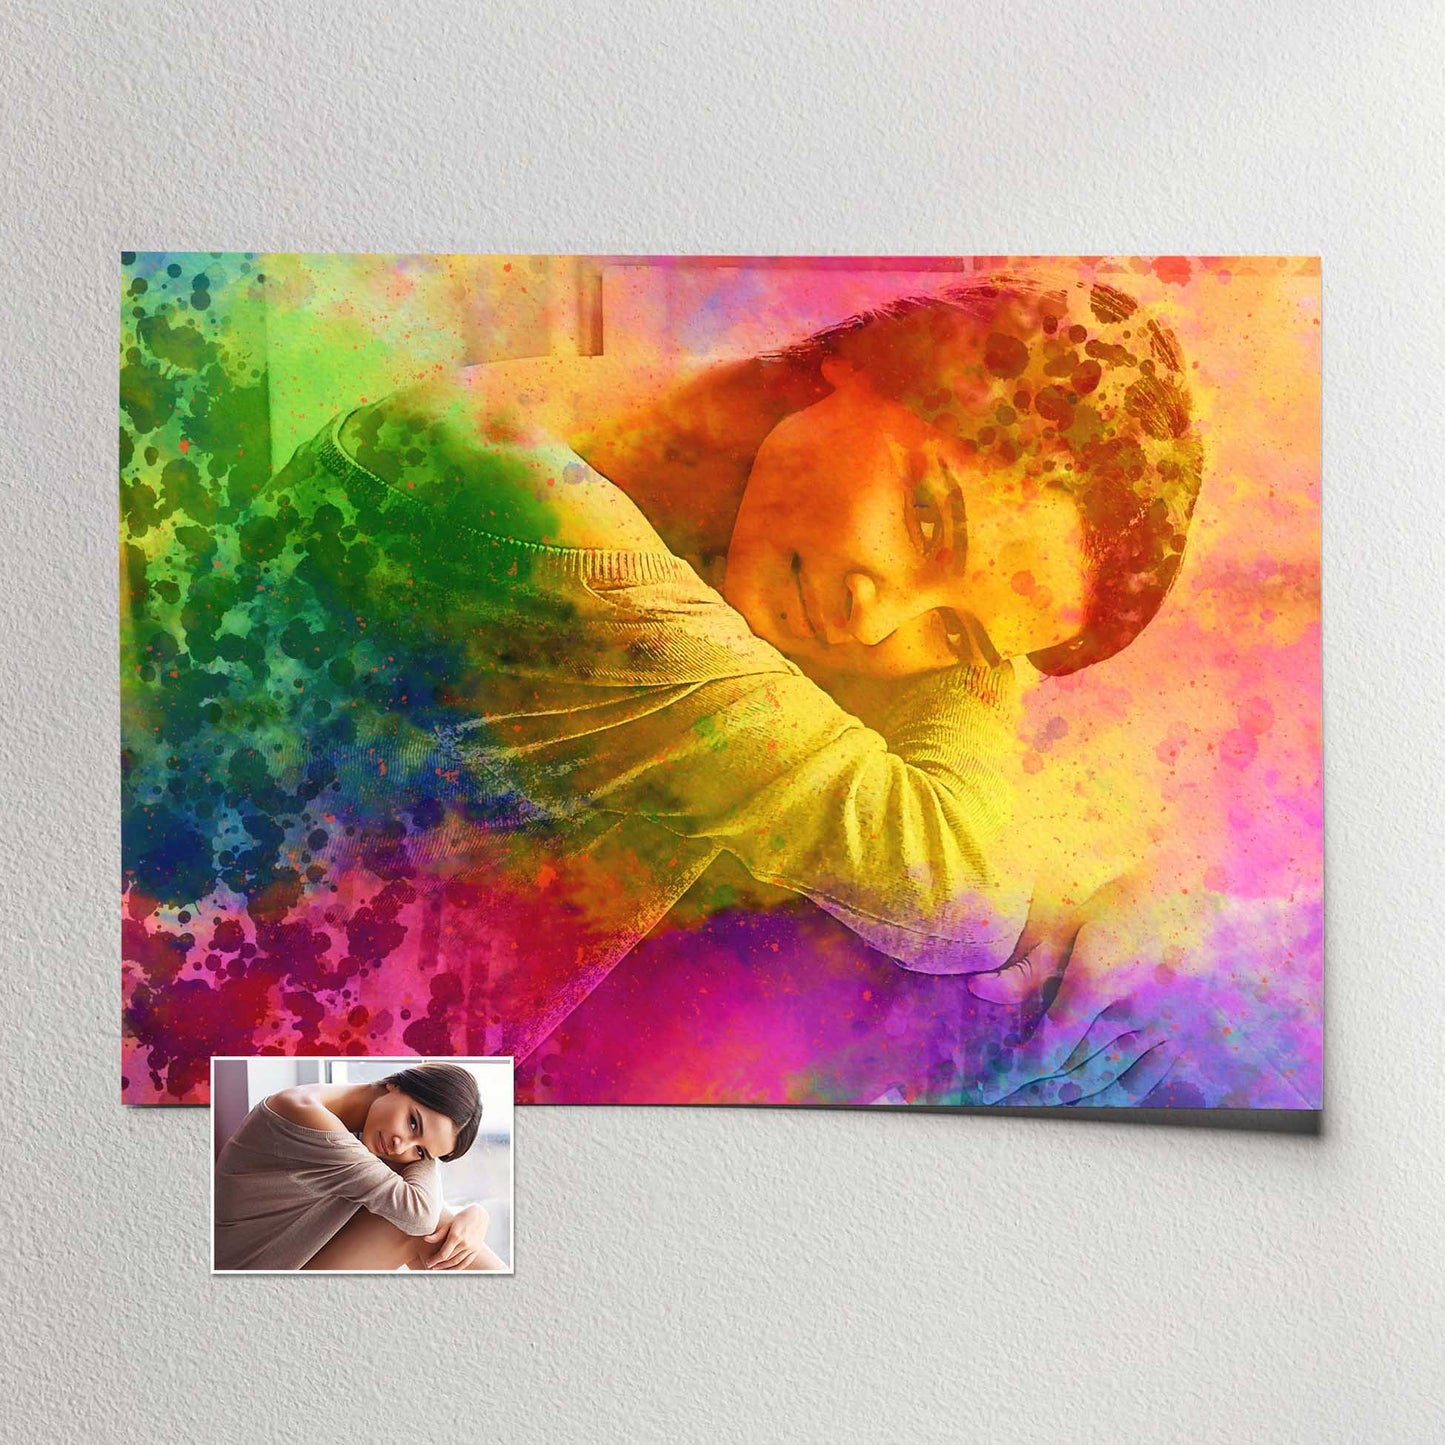 Personalised Splash of Colors Print: Turn your cherished photo into a vibrant and vivid watercolor masterpiece. The brush color splash effect adds a dynamic touch, featuring pink, purple, green, blue, red, and yellow hues